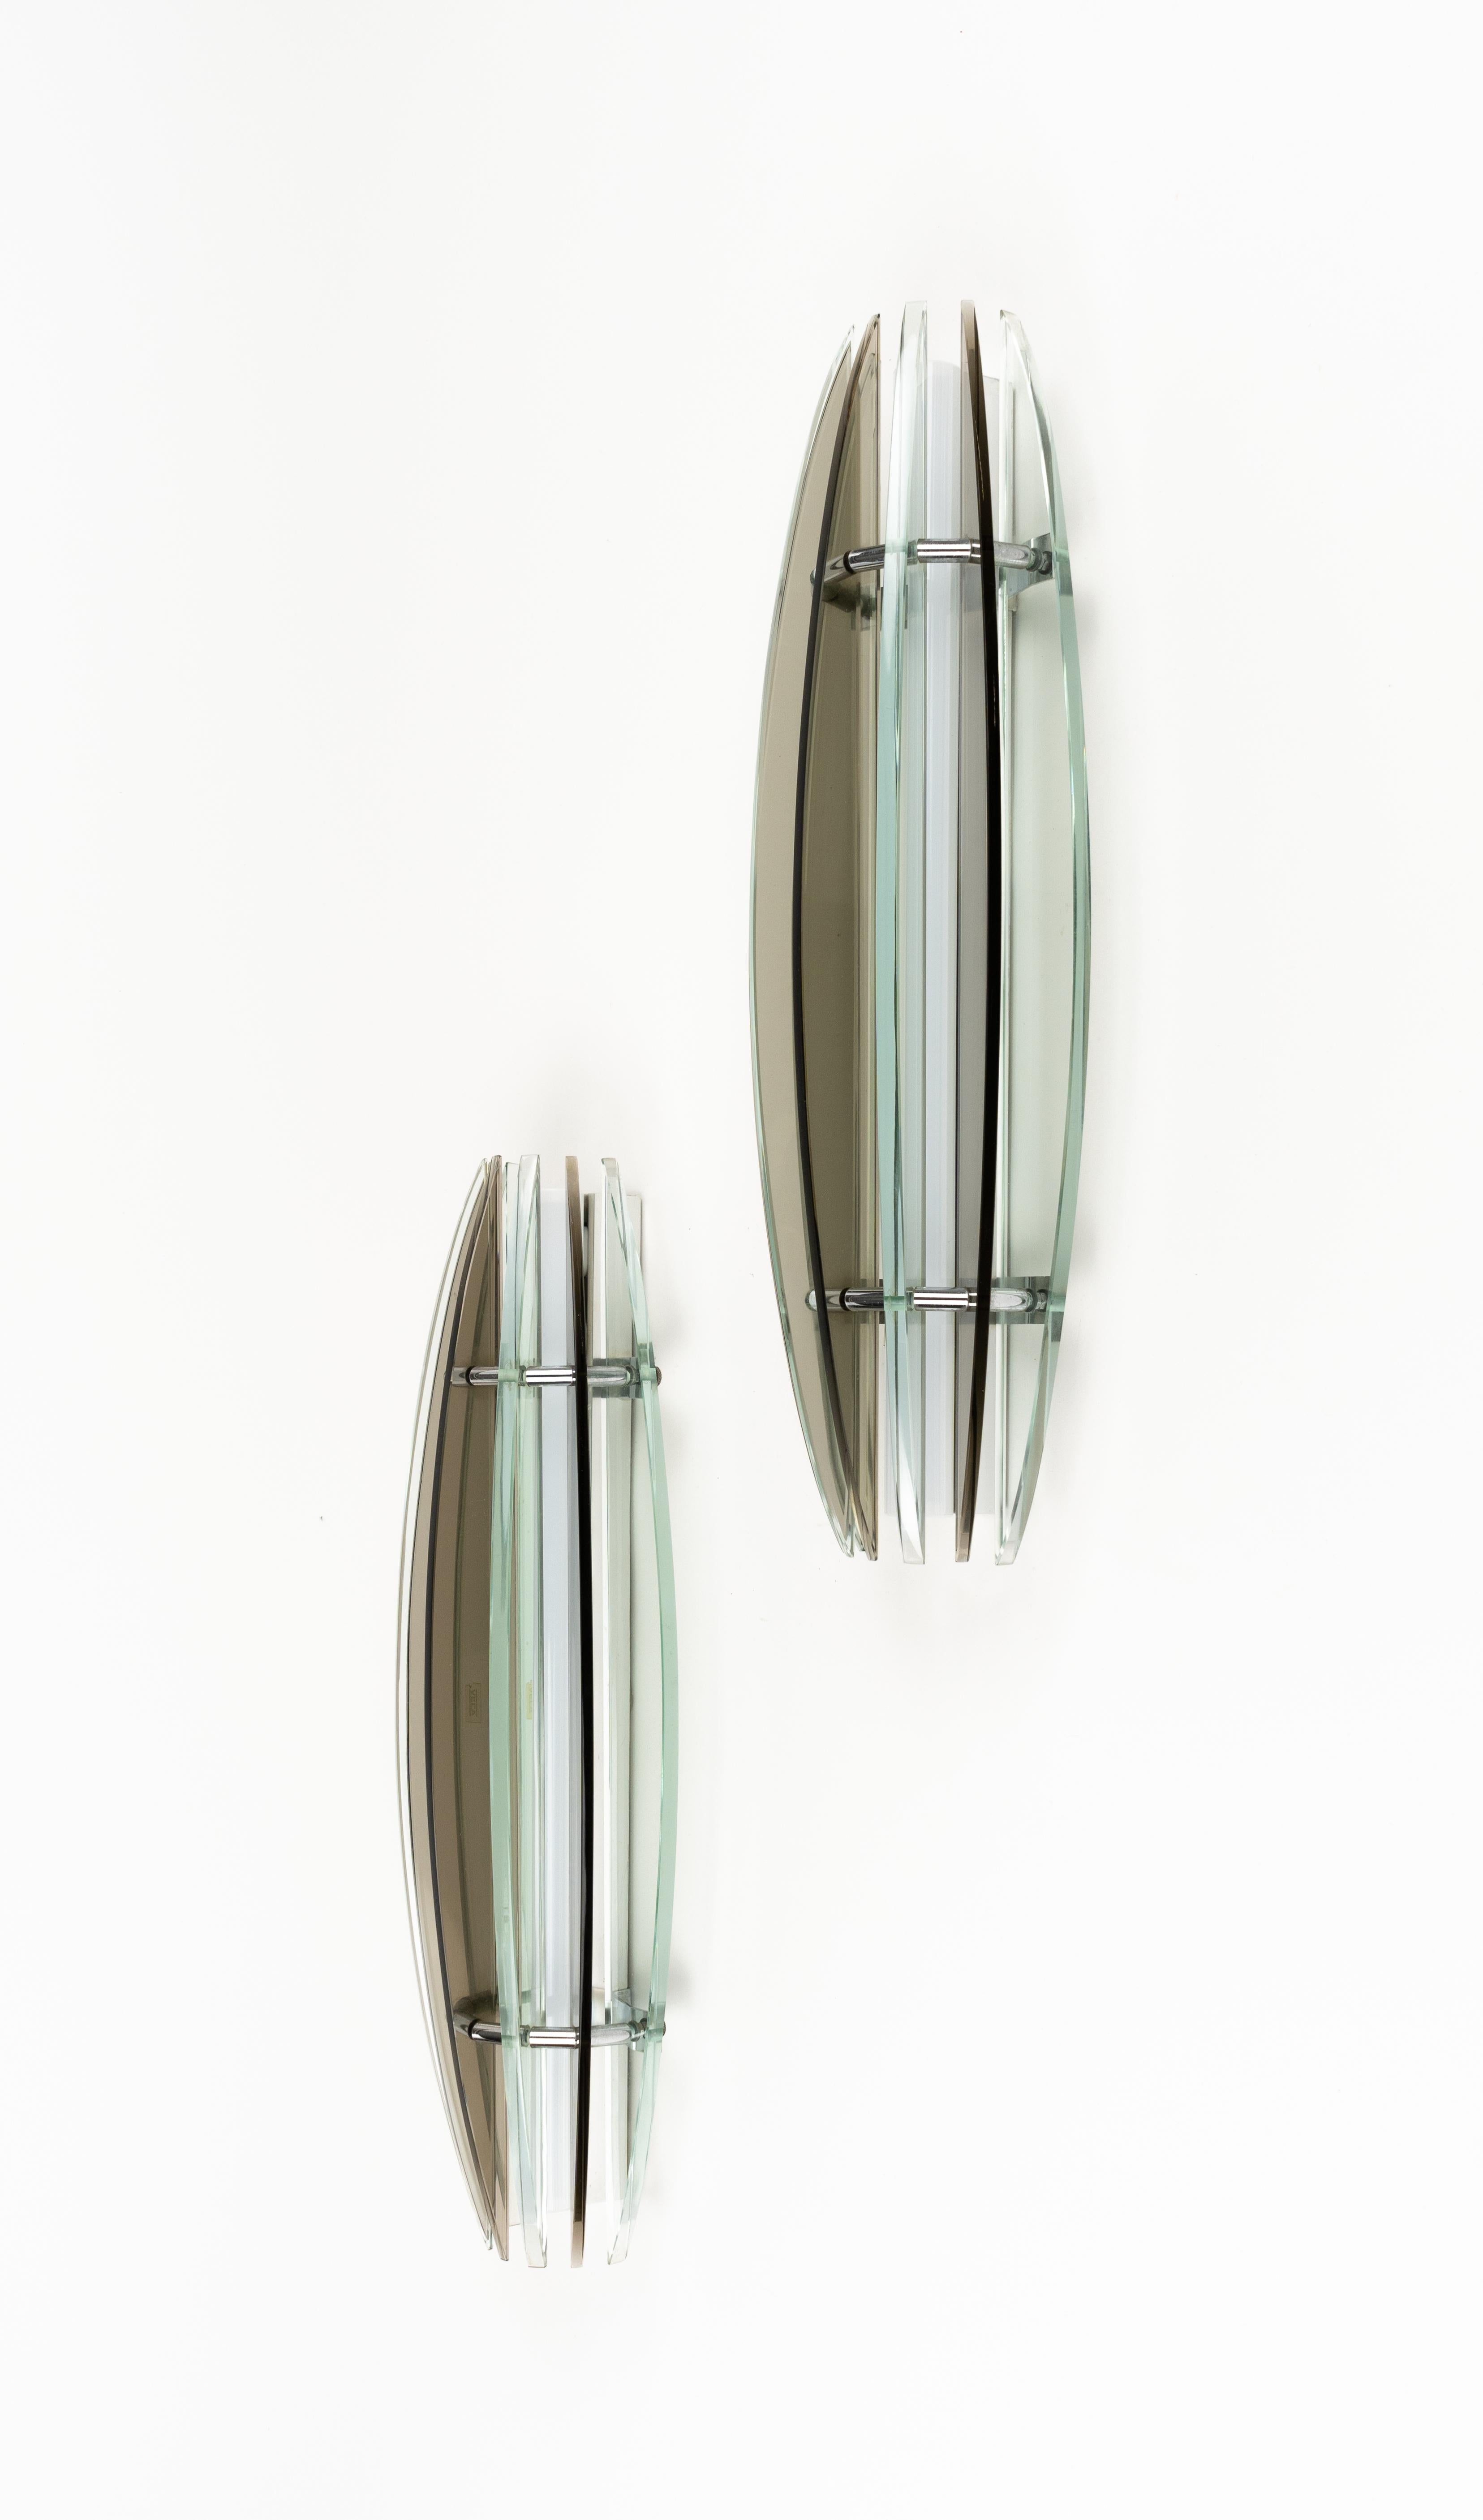 Midcentury Large Pair of Sconces in Colored Glass & Chrome by Veca, Italy, 1970s For Sale 1